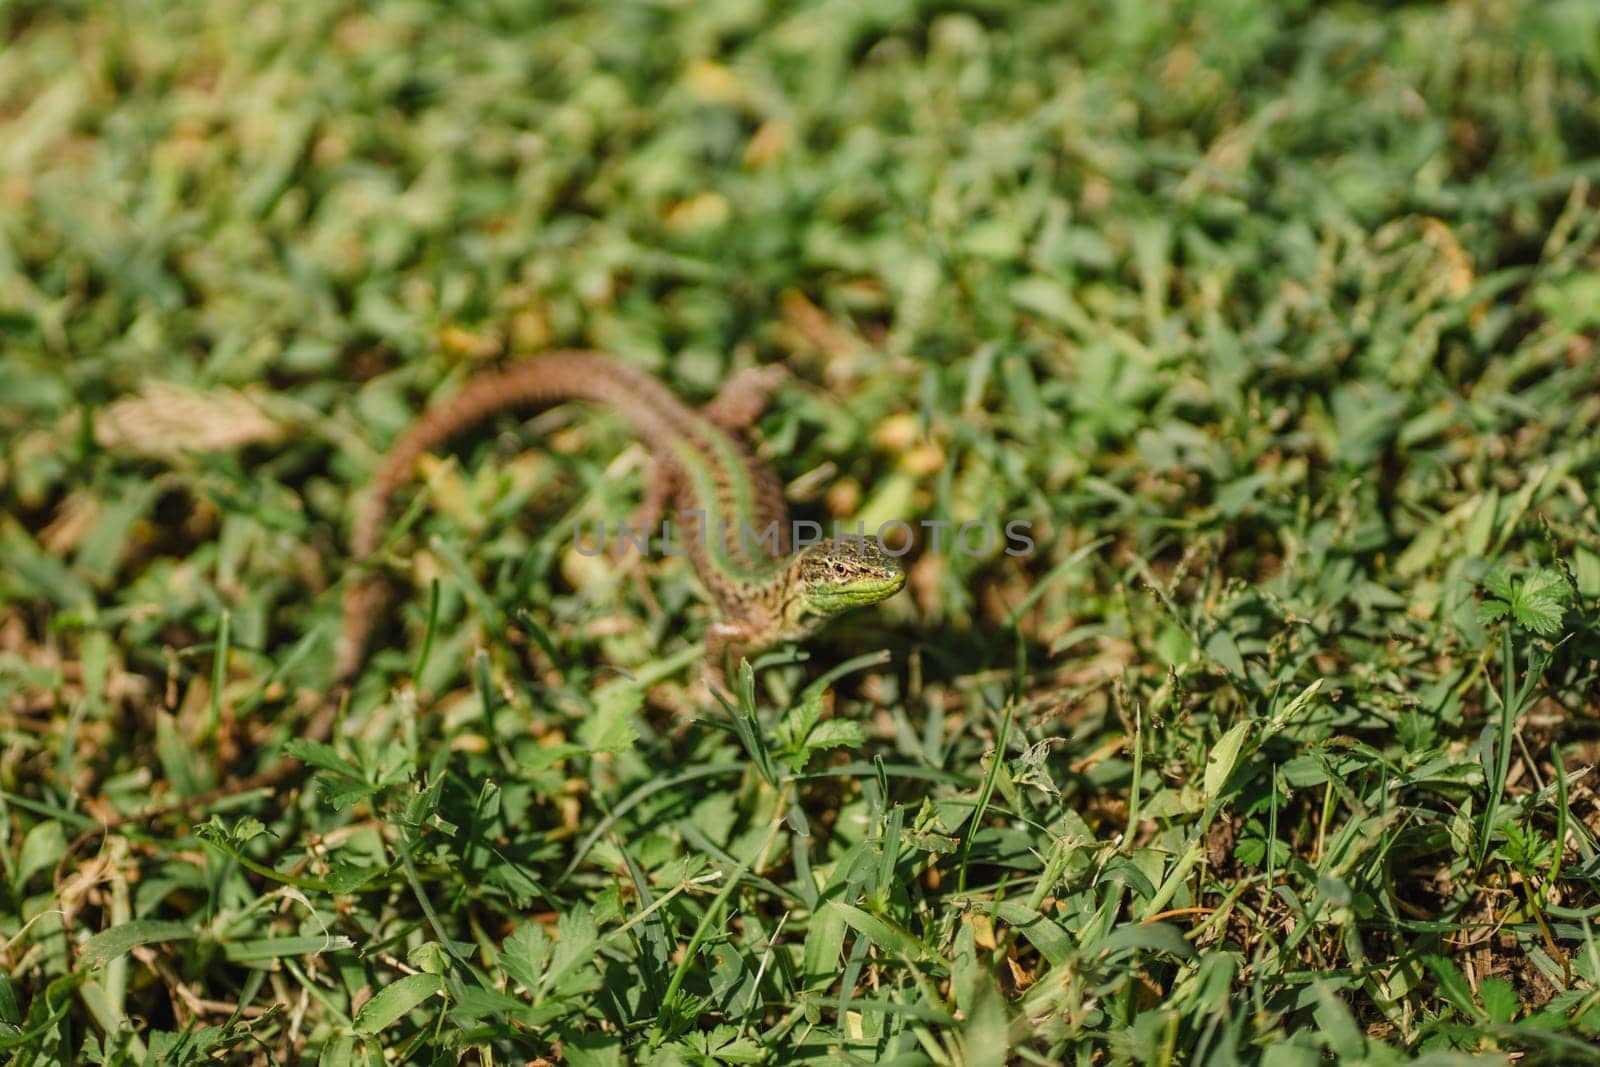 Green and brown lizard, small reptile in grass of tropical summer garden